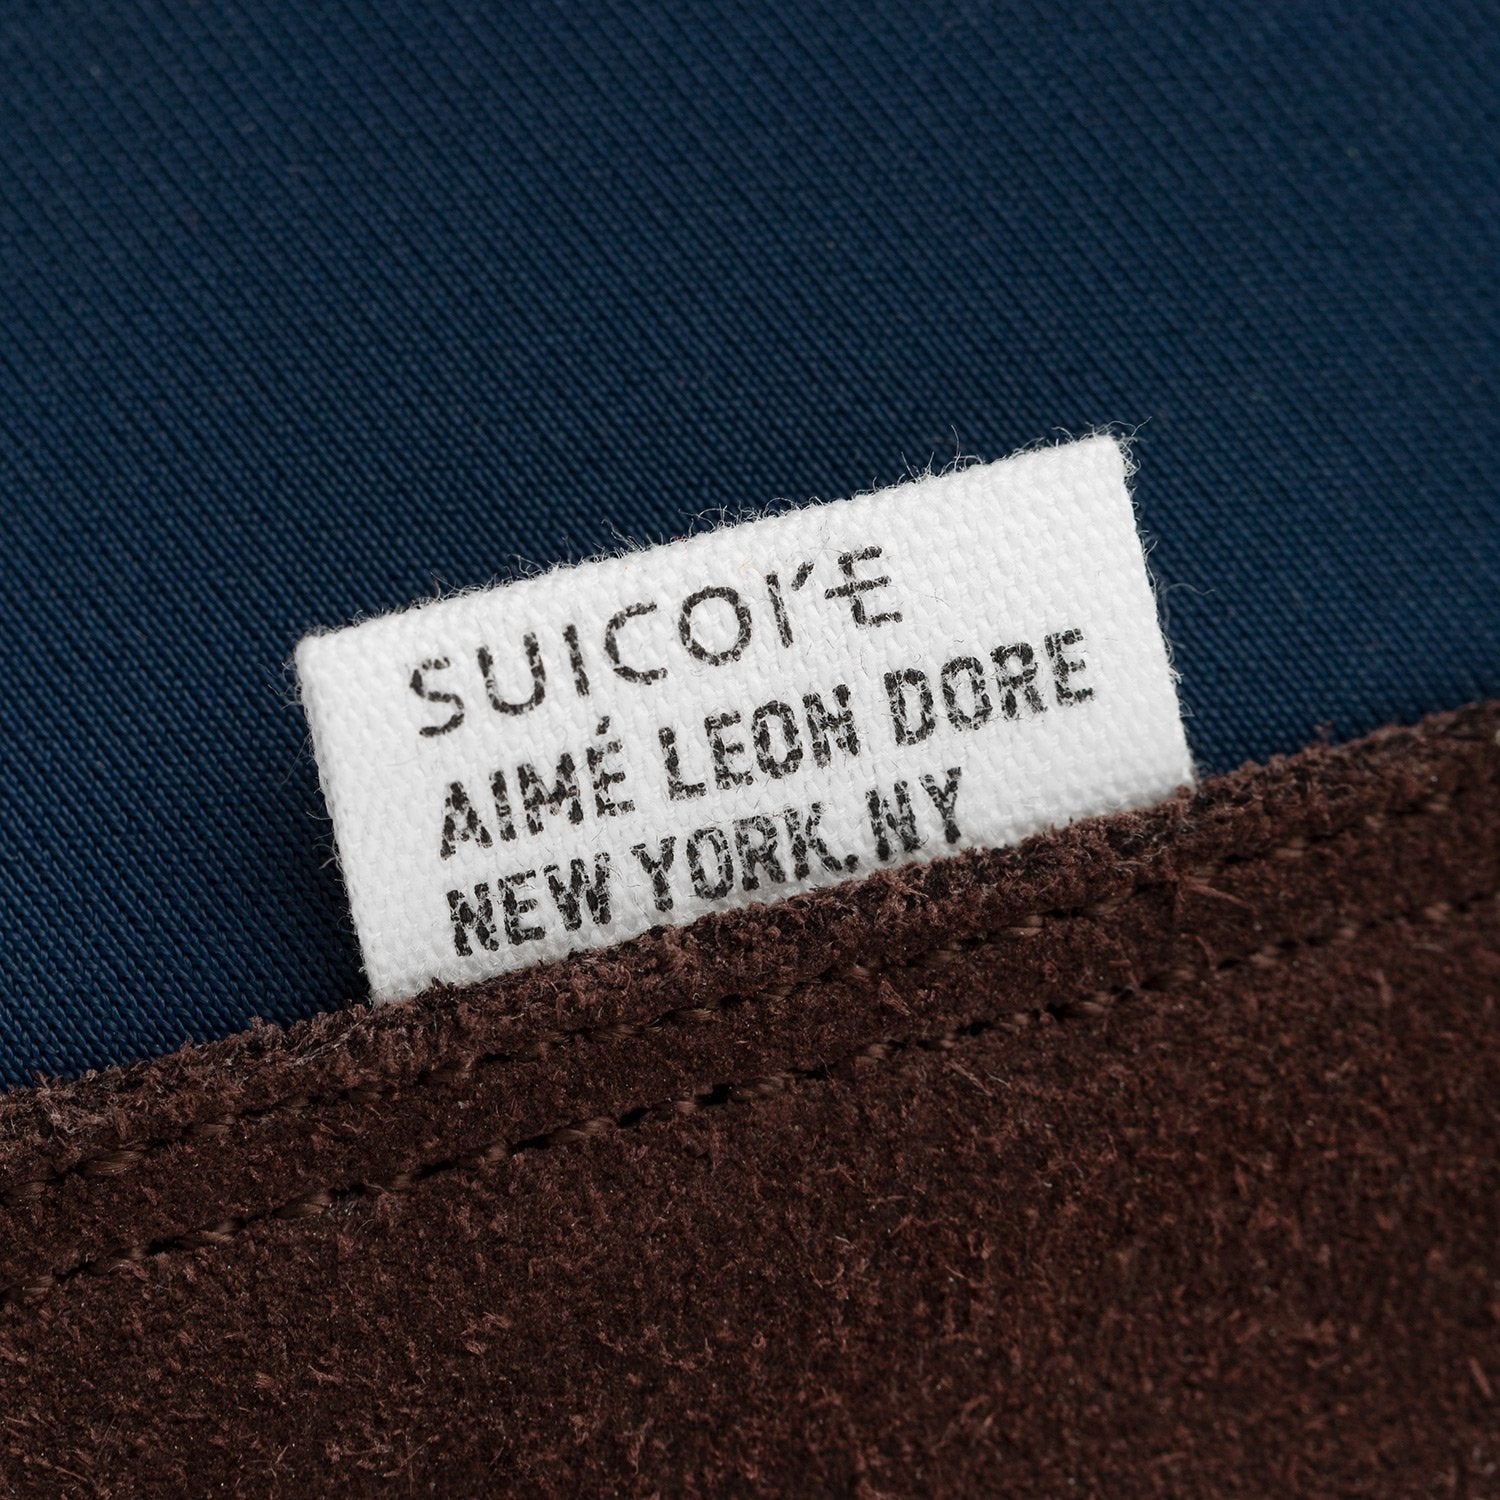 SUICOKE Aim√© Leon Dore Edition RON-MAIM-MID shoes with mixed color  cow suede + shearling linng upper, EVA antibacterial footbed, SUICOKE original sole. From Aim√© Dore capsule collection on SUICOKE Official US & Canada Webstore.